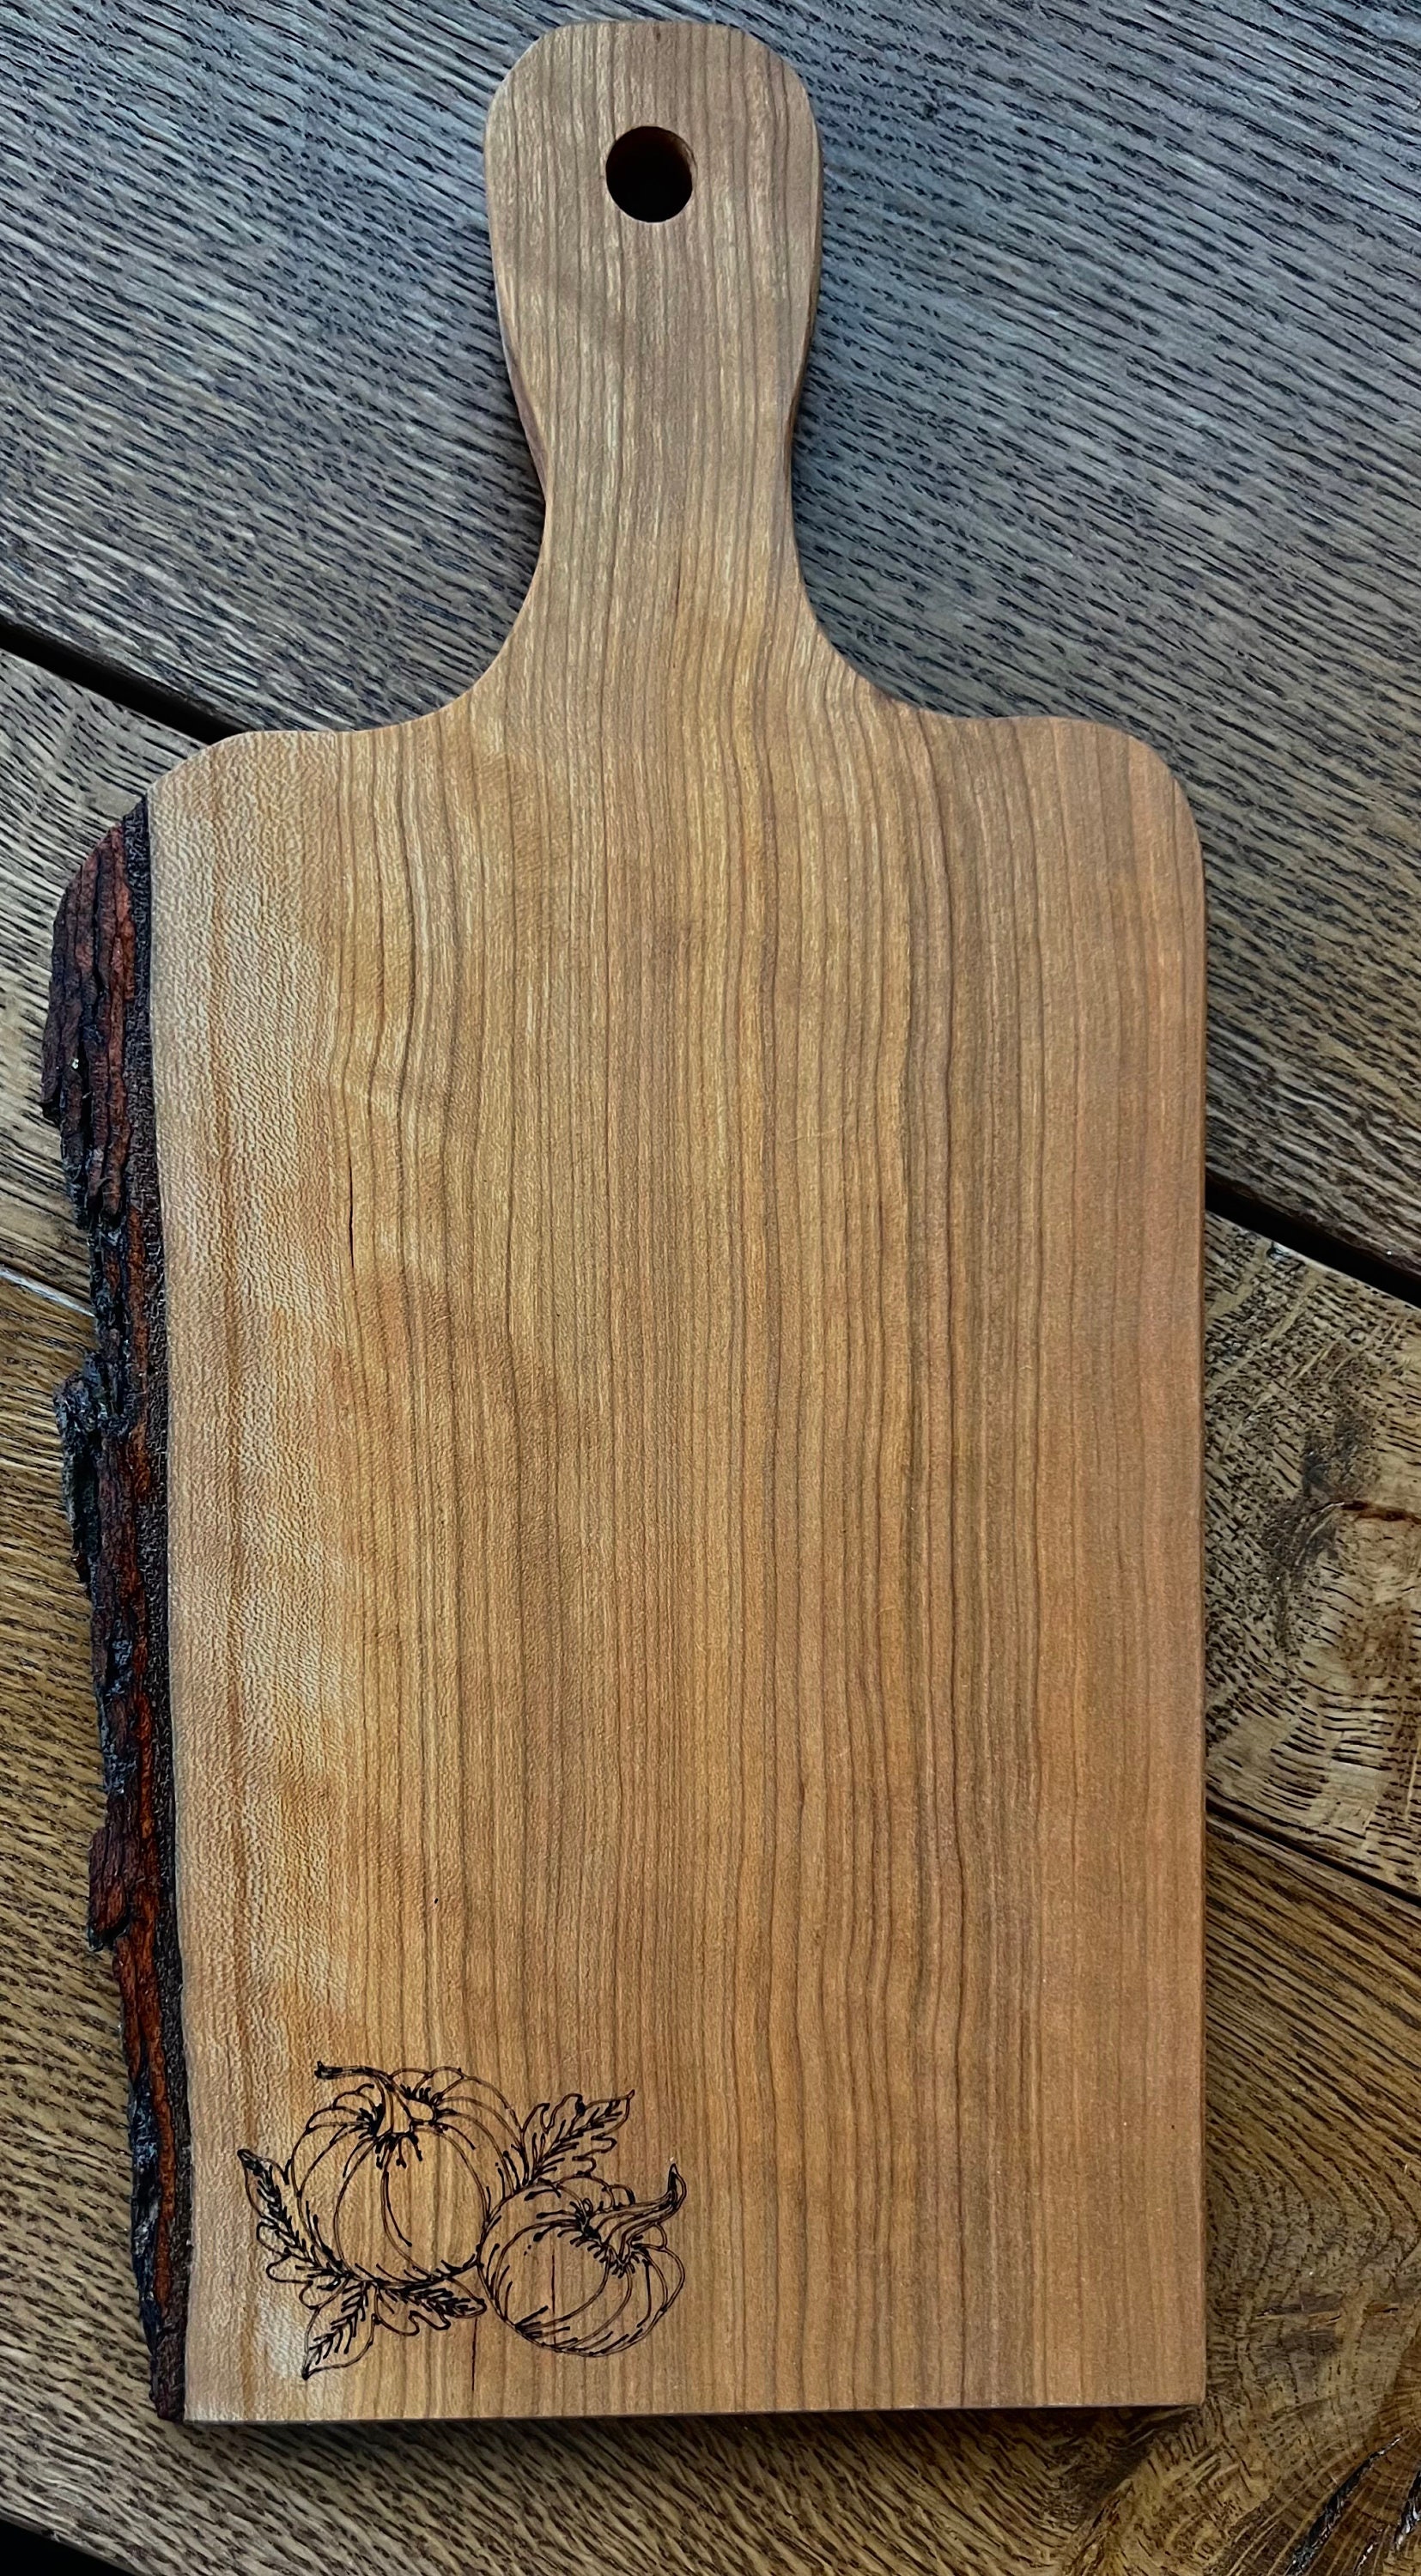 Organic Live Edge Thick Black Cherry Slab- Cutting Board with Live Edge and  Colorful grain- Personalized 5th Anniversary Gift 787 — Rusticcraft